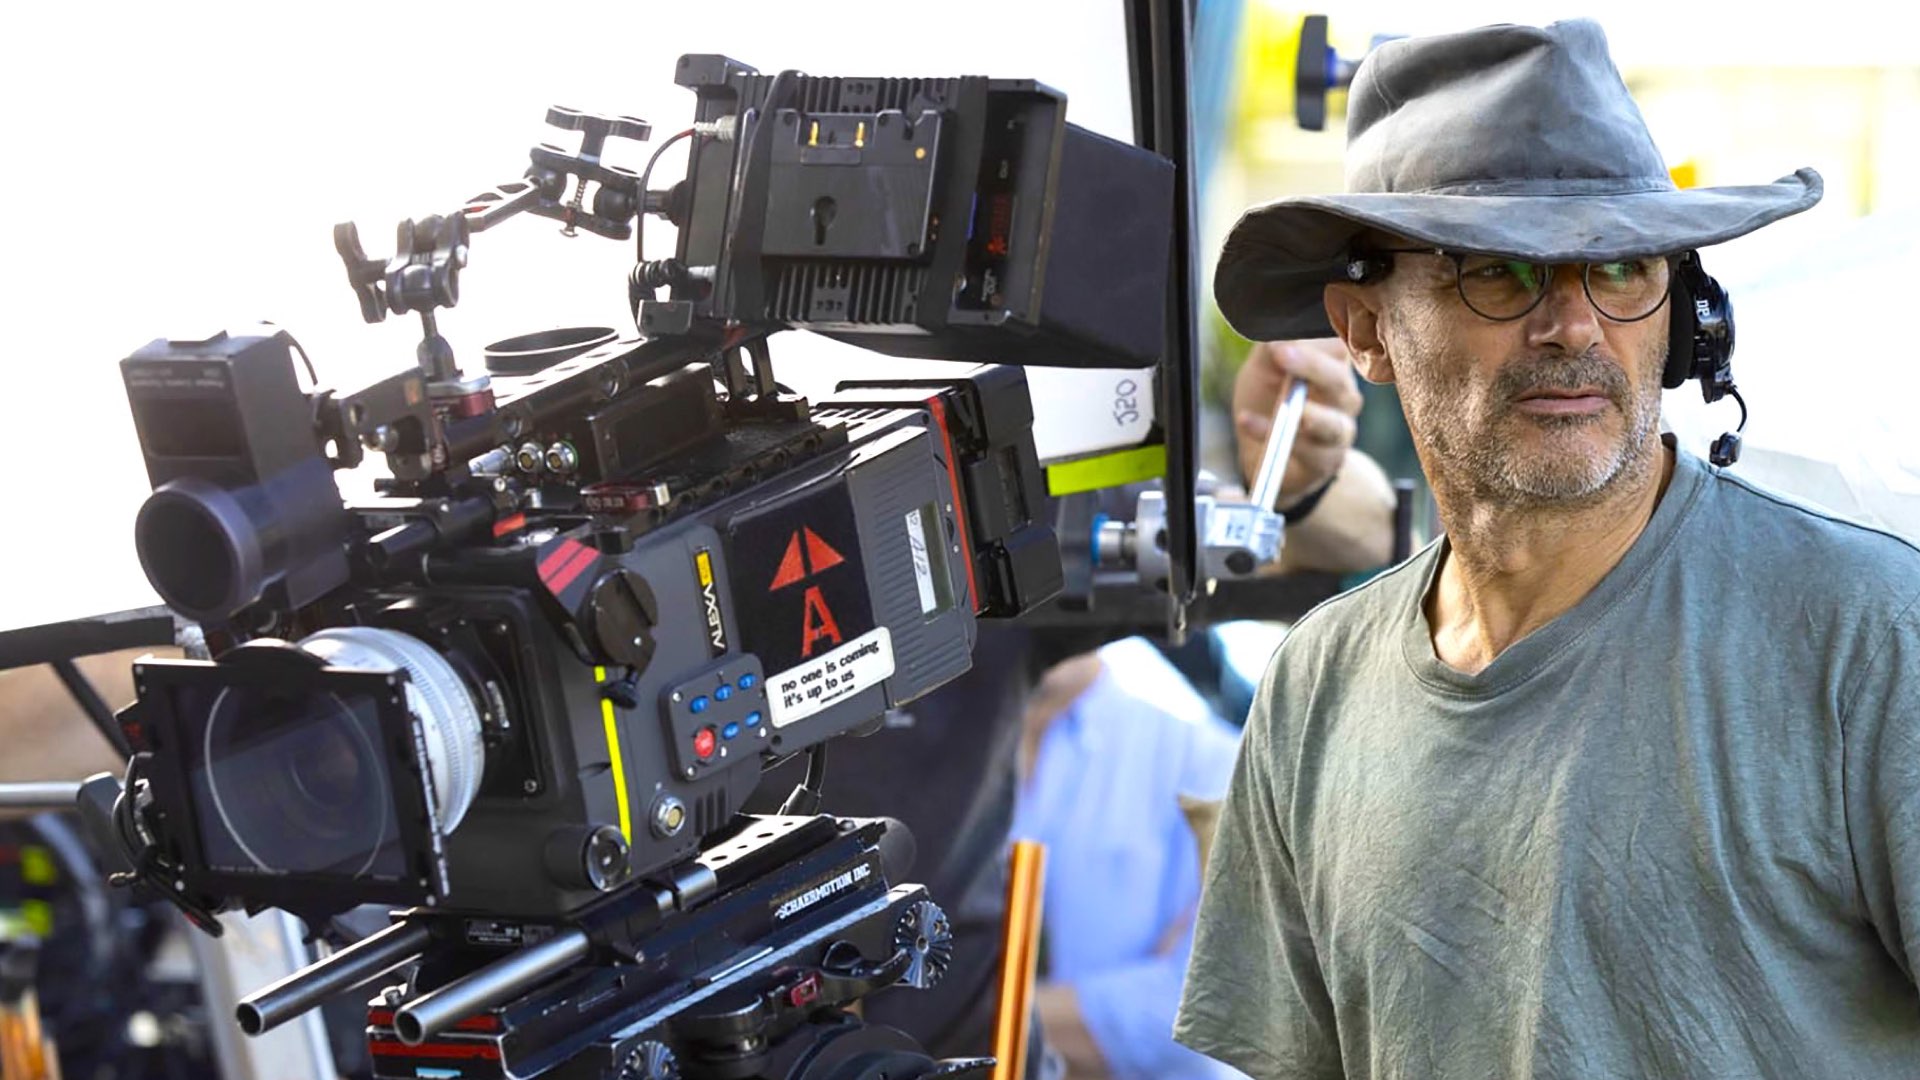 Godzilla vs. Kong was Shot on ALEXA 65 With Prime DNA Lenses: Exclusive BTS Revealed. Photo by: Chuck Zlotnick & Vince Valitutti